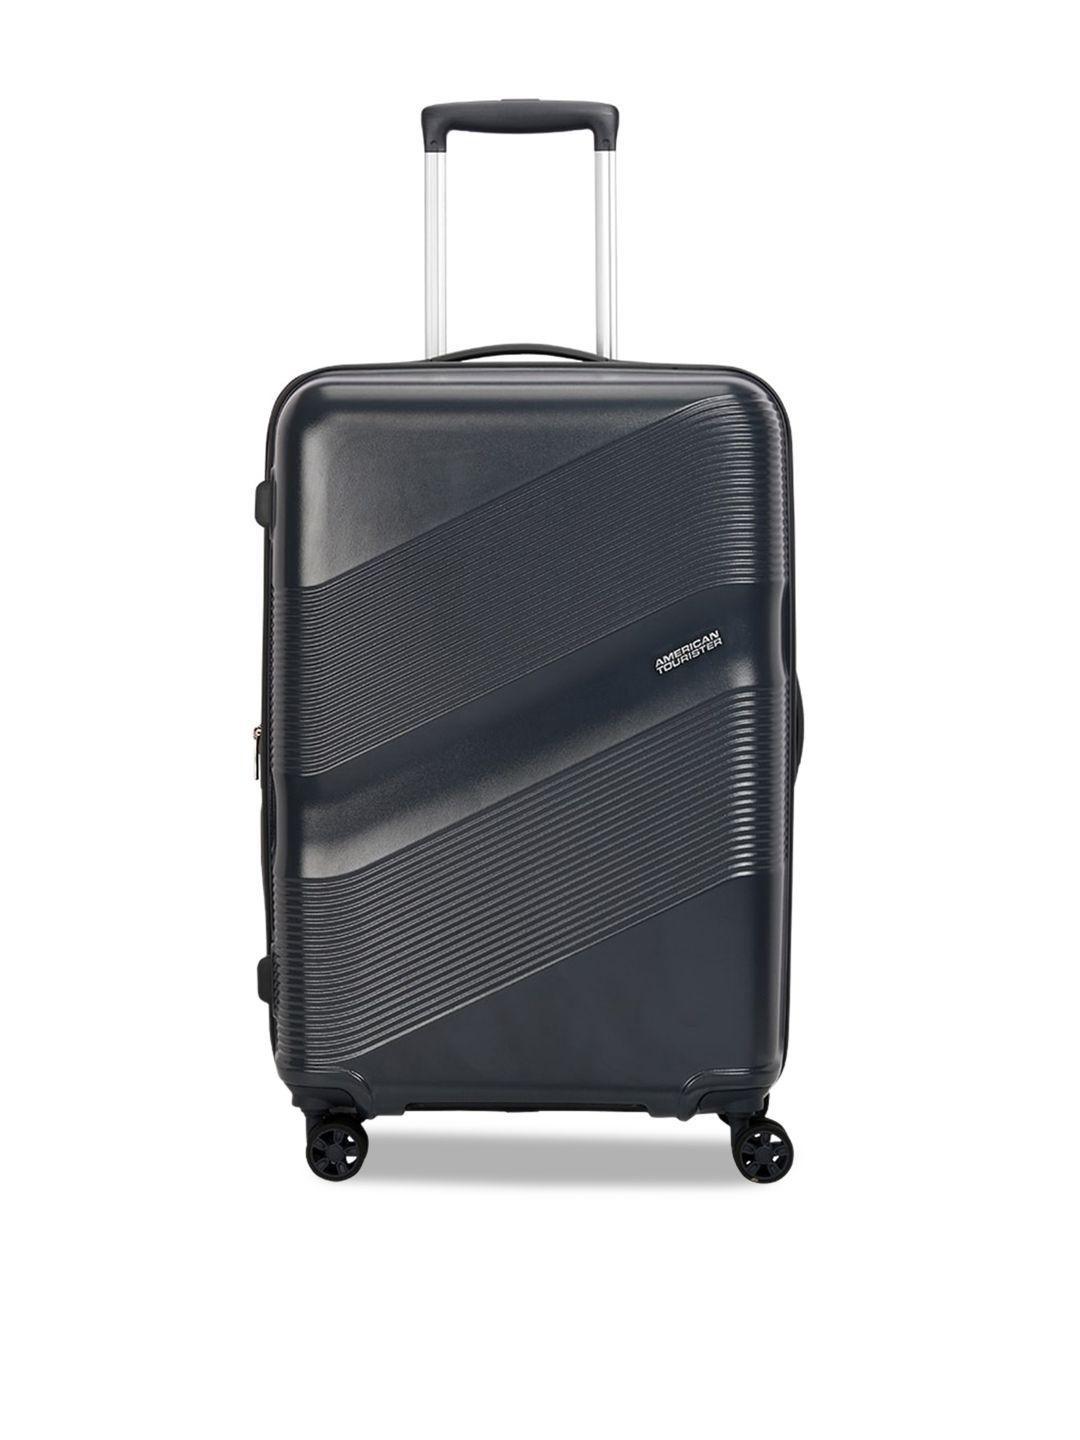 american tourister grey textured hard-sided trolley bag